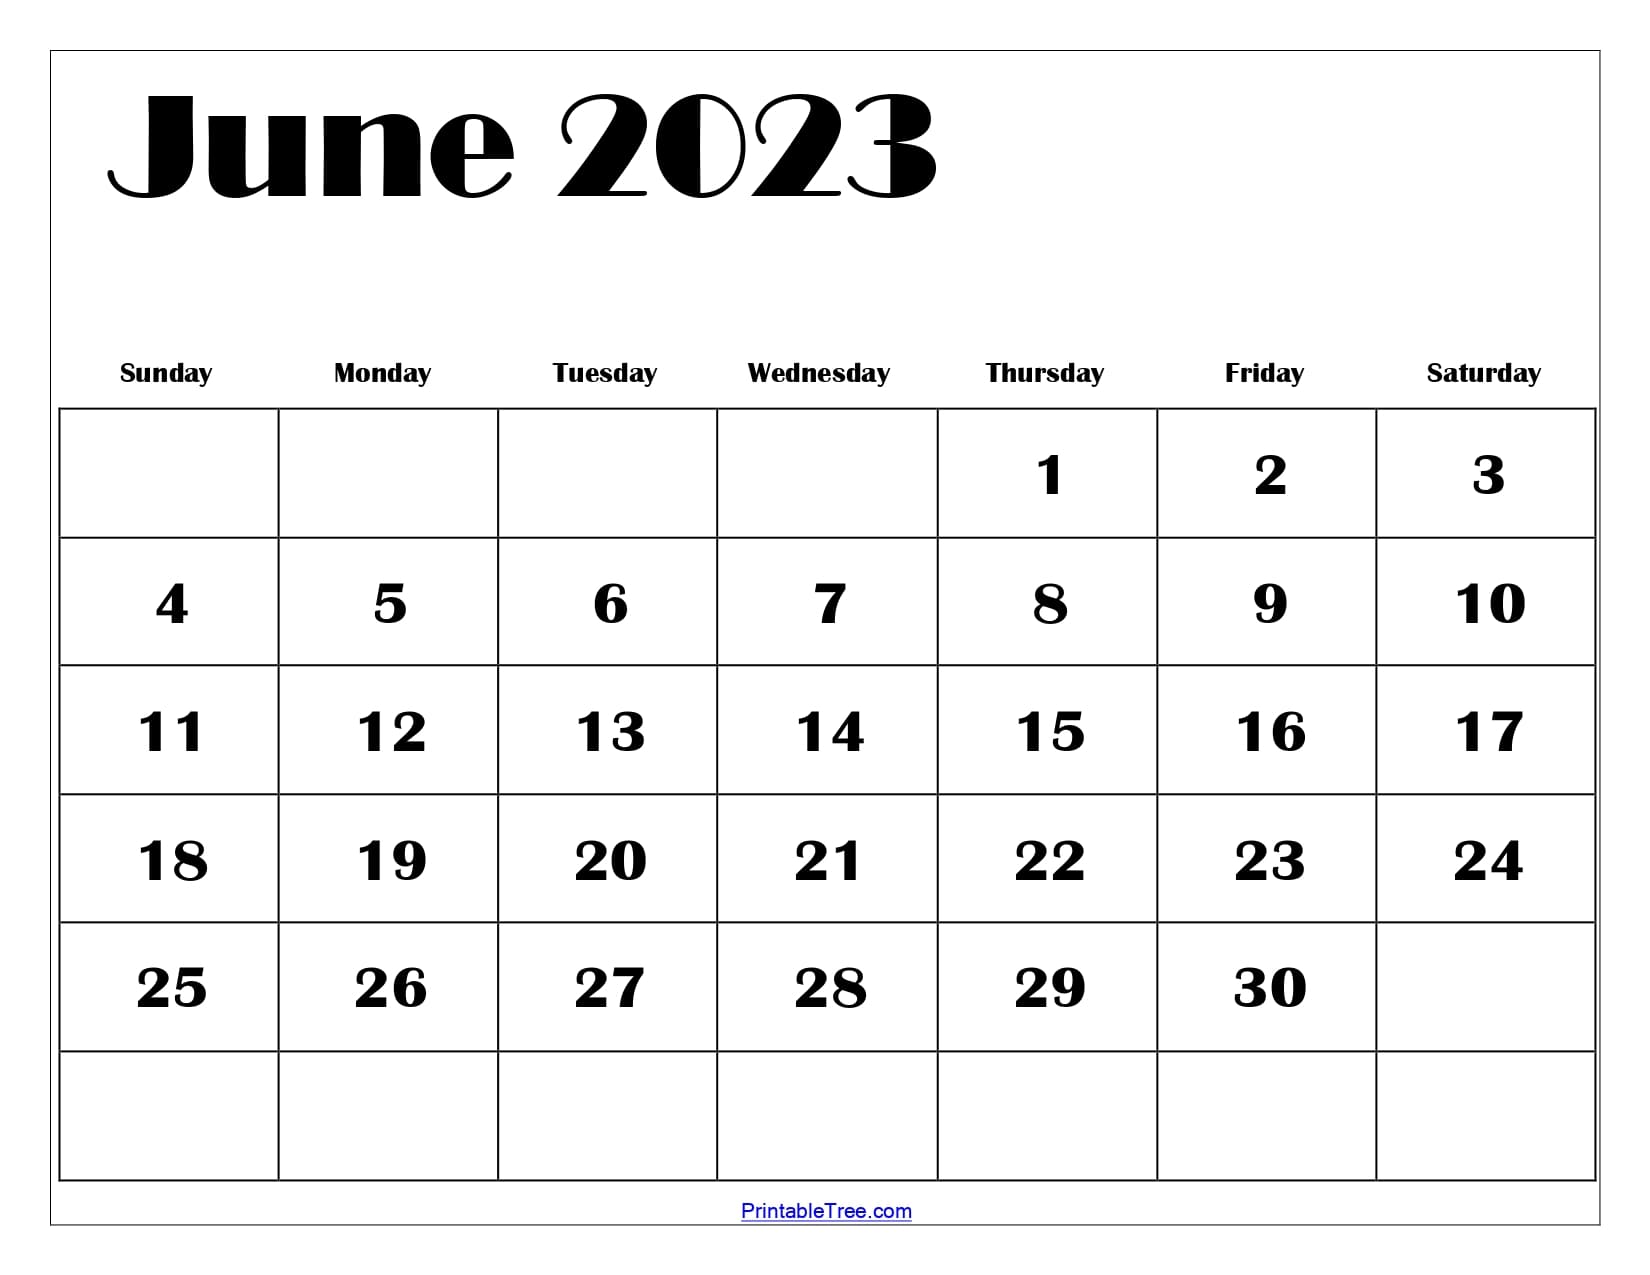 Free june calendar printable pdf with holiday templates